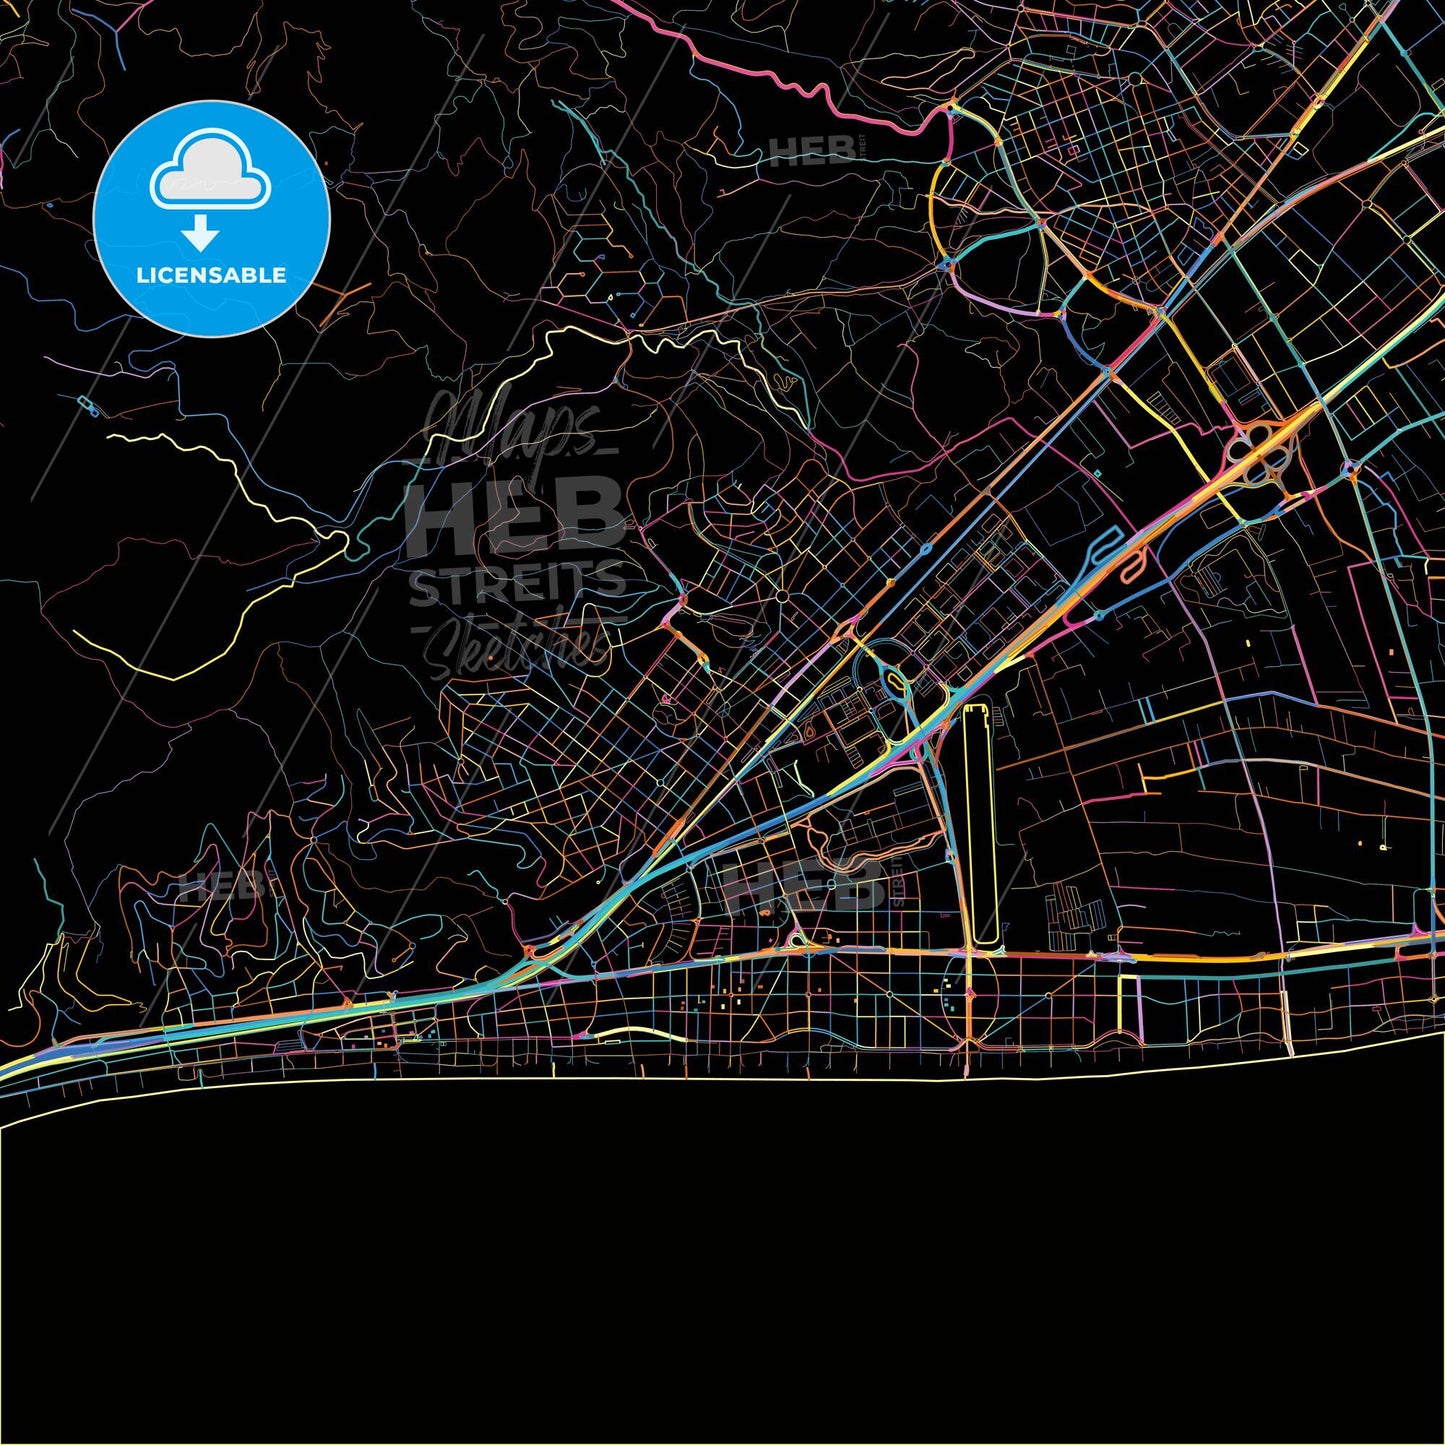 Castelldefels, Barcelona, Spain, colorful city map on black background